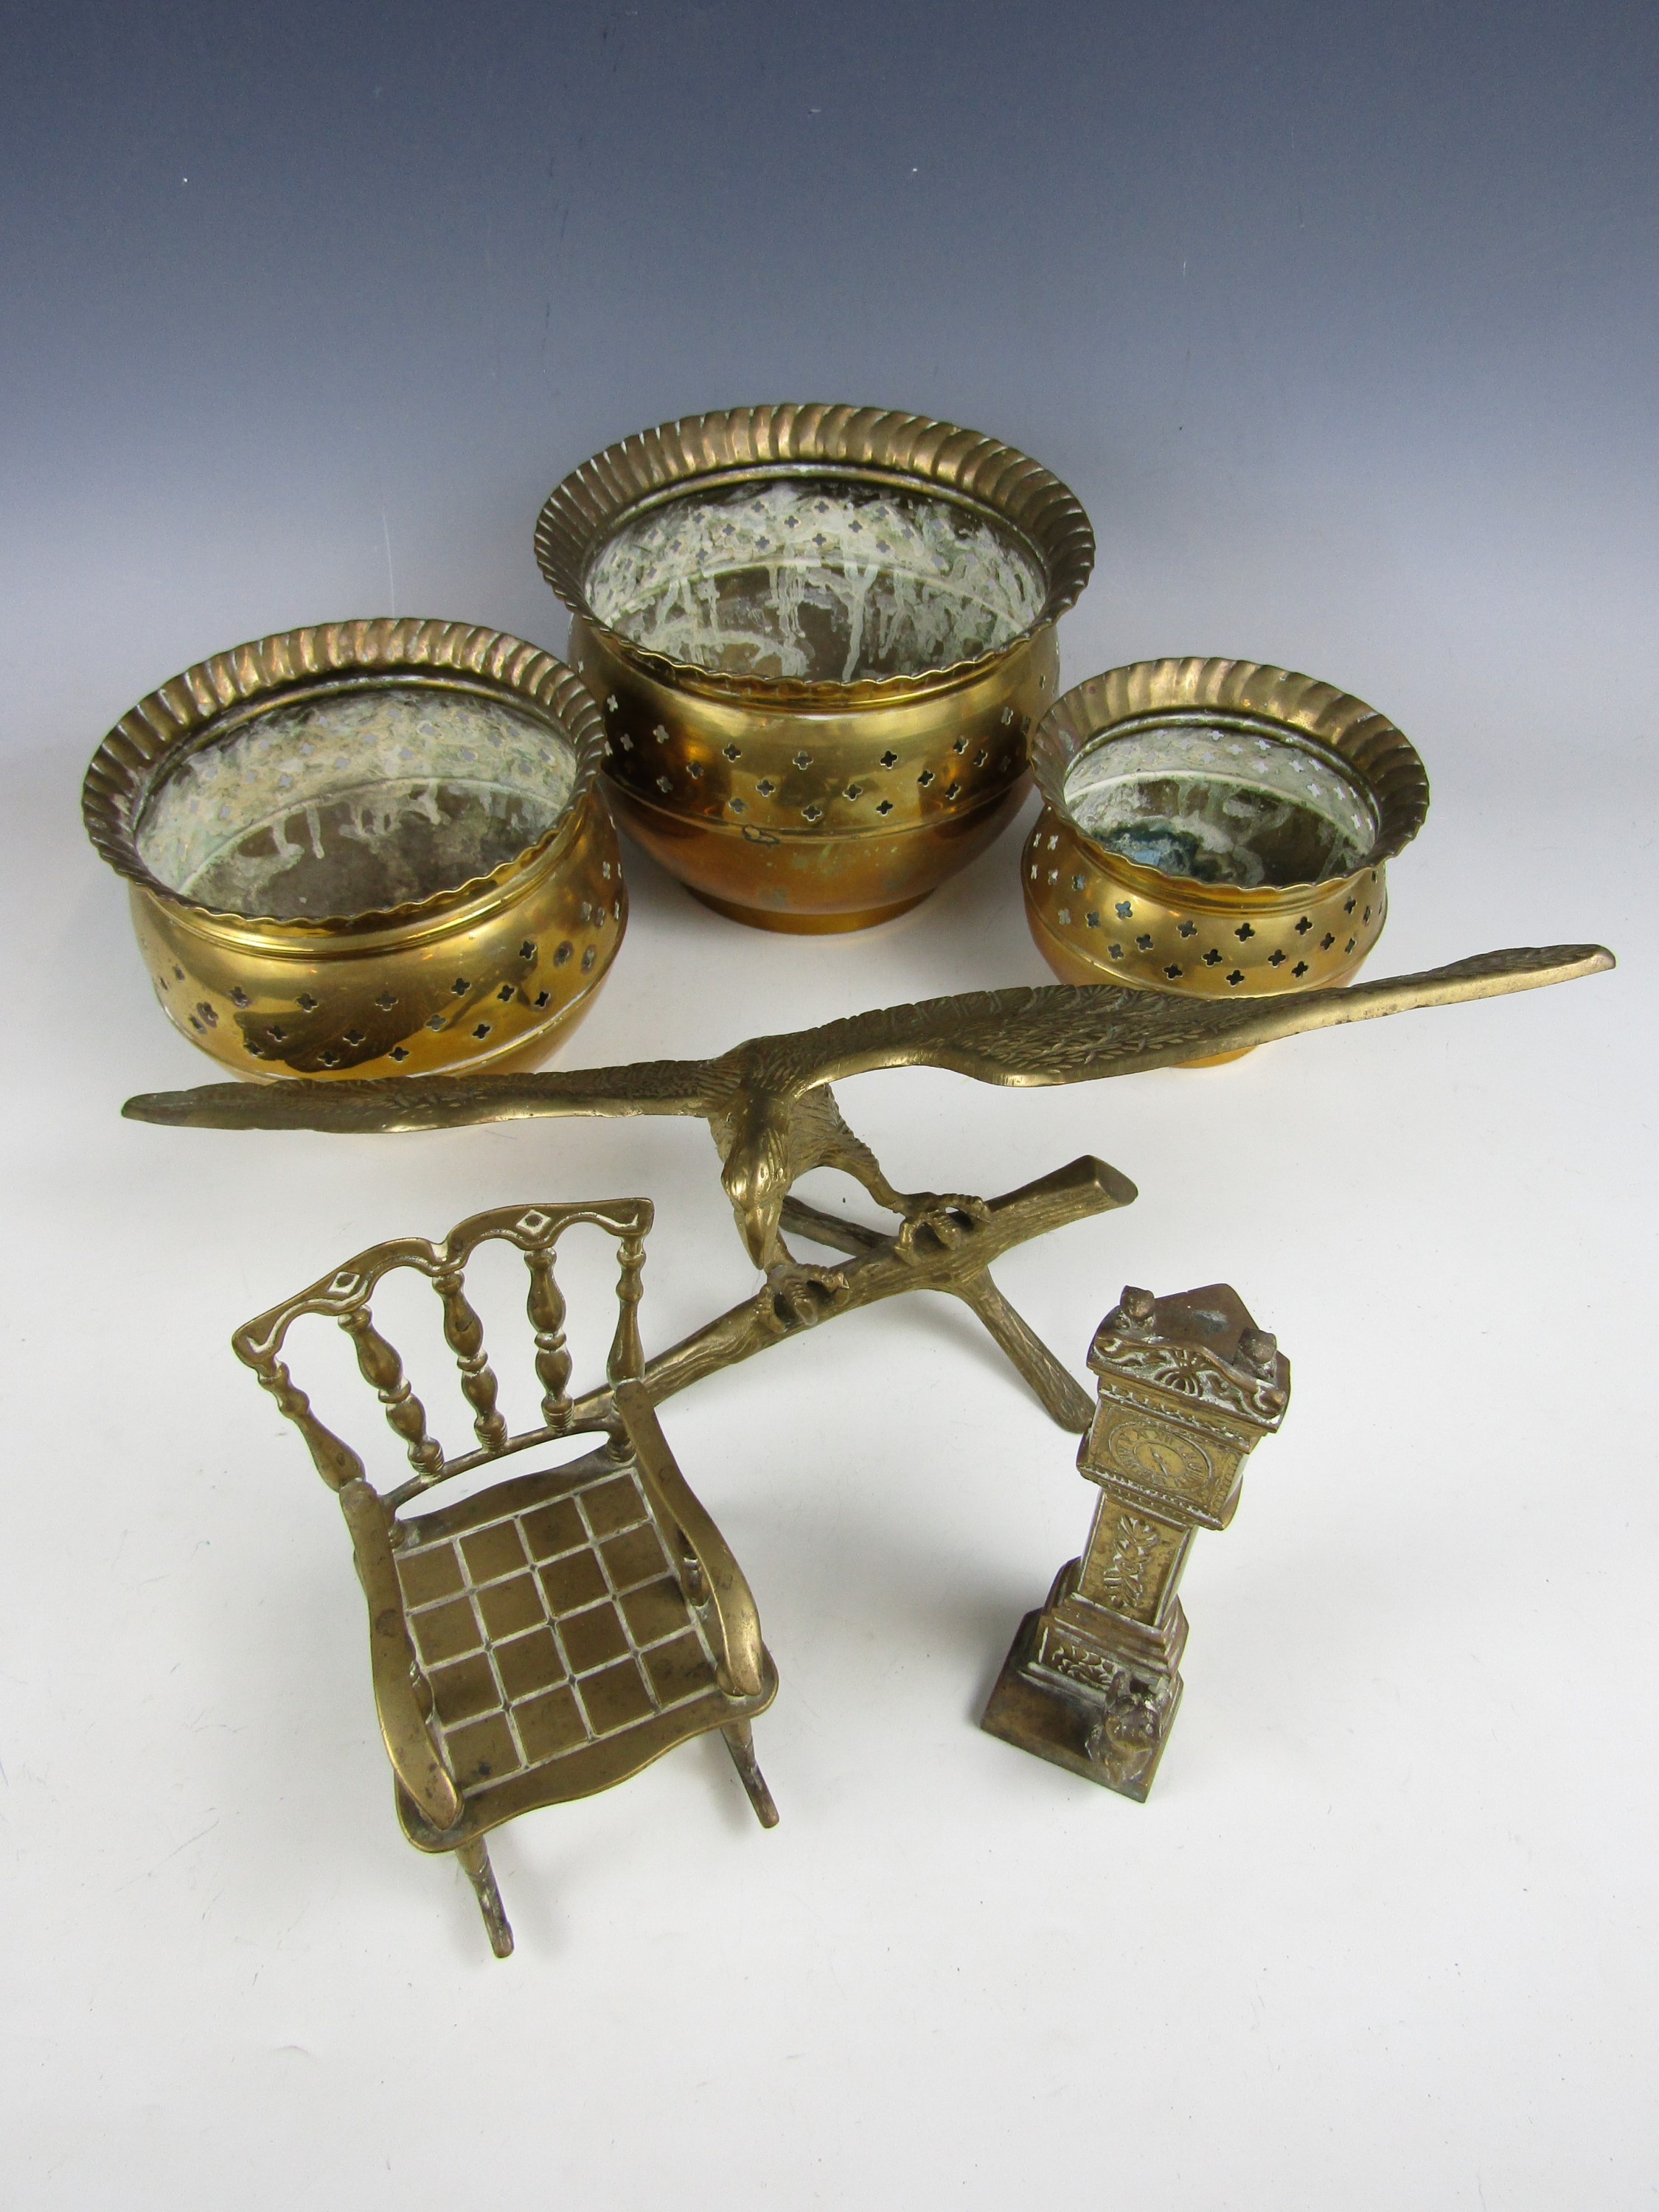 Vintage brassware including three graded cachepots, a brass model of an eagle, and a novelty brass